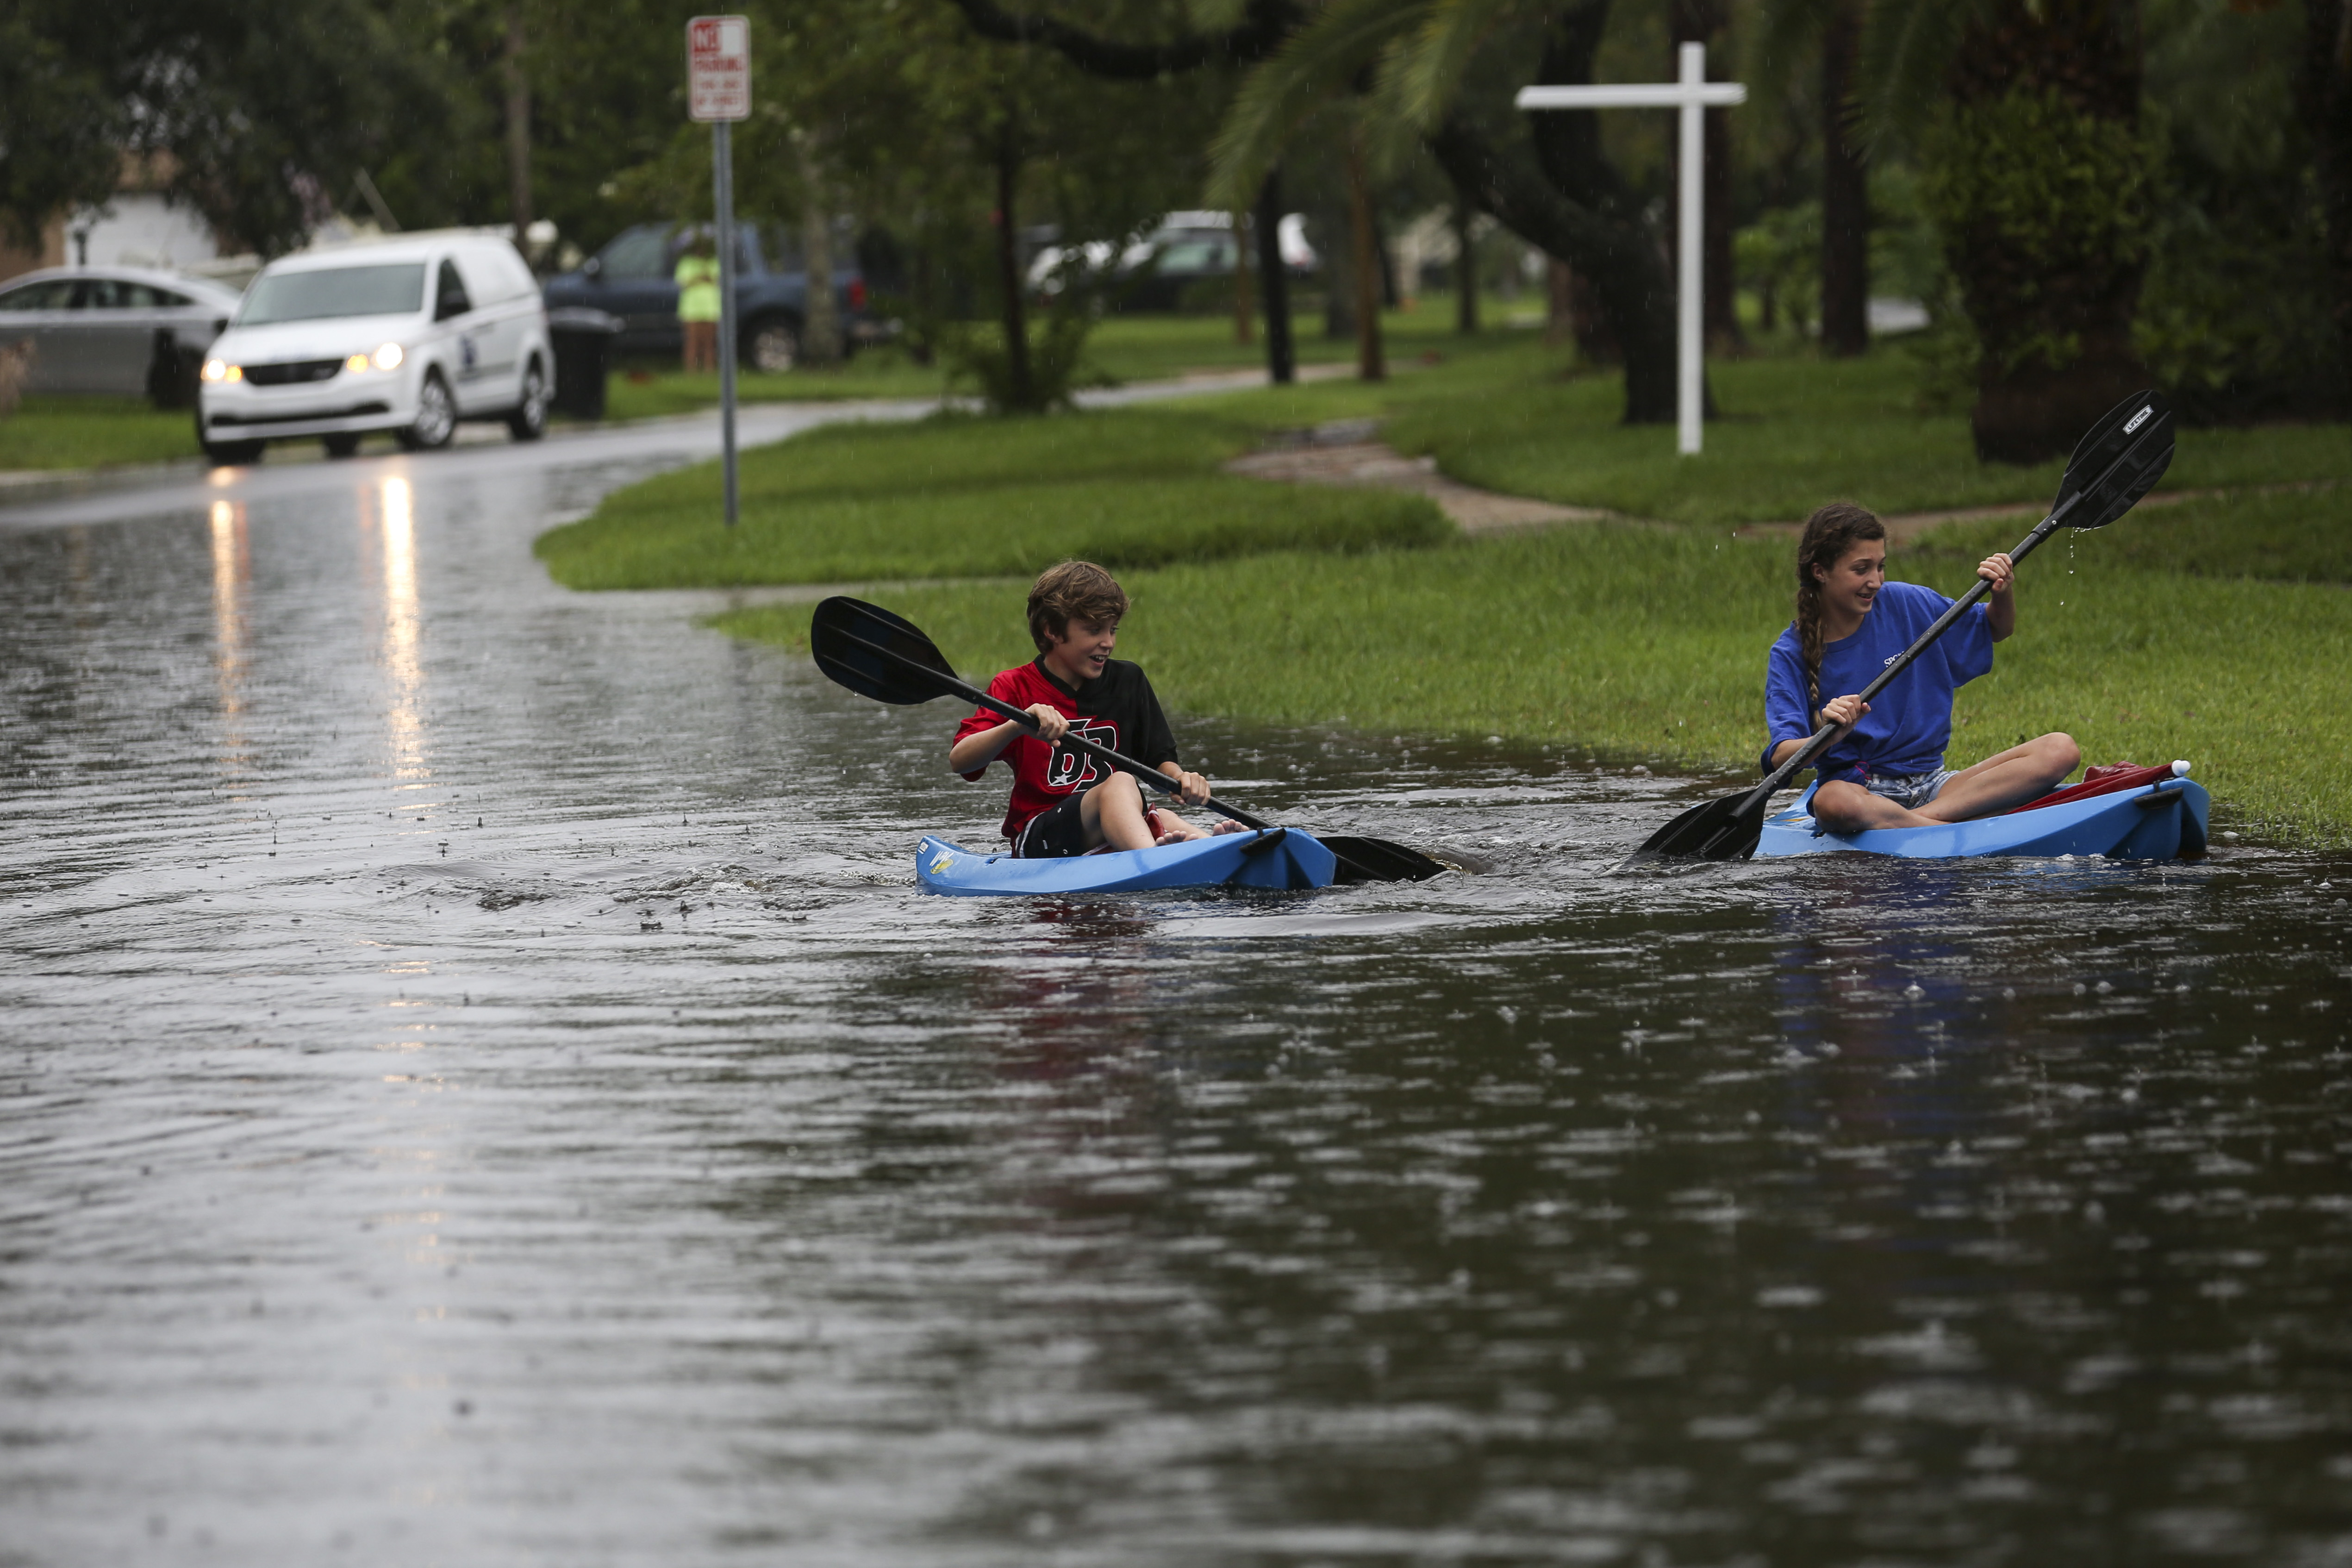 Brian Vaughan, 10 and his sister Brianna Vaughan, 13, paddle in their kayaks down their street, Venetian Blvd NE in Shore Acres on Wednesday, June 7, 2017, in St. Petersburg, Fla. Heavy rains that have hit South Florida the past couple of days. (Eve Edelheit/Tampa Bay Times via AP)